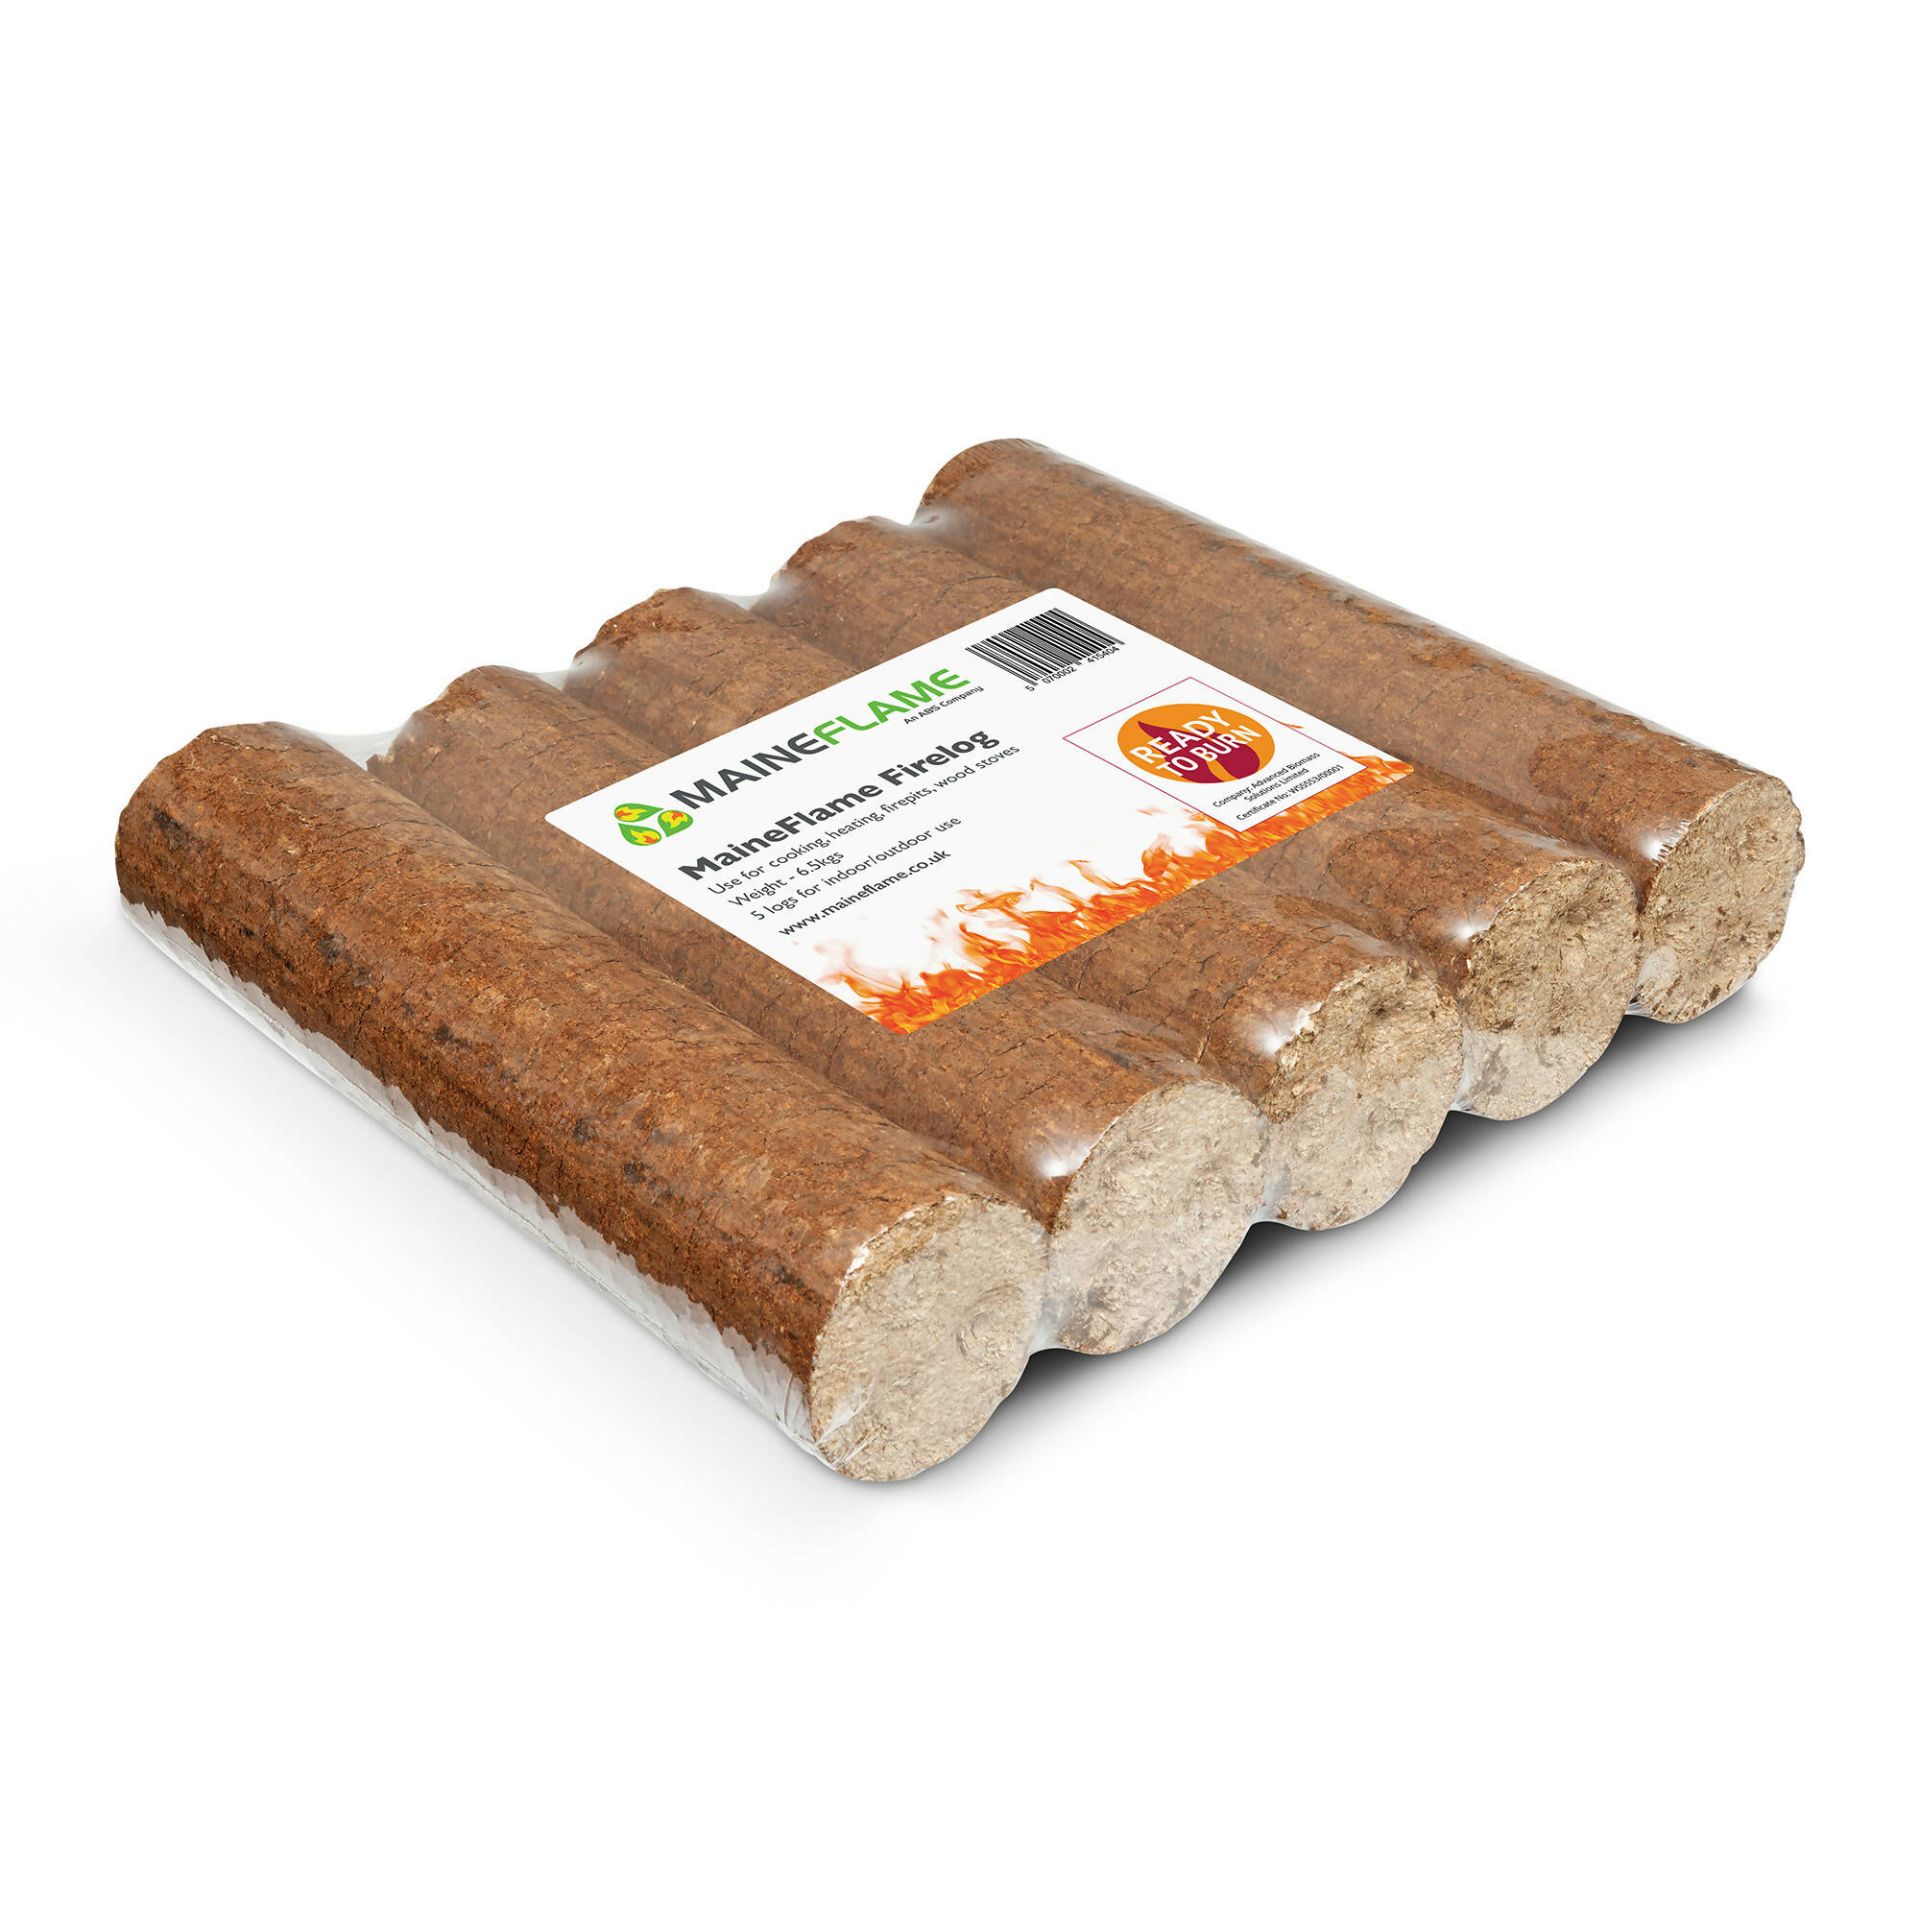 TRUCKLOAD = 26 PALLETS OF PRESSED FIRE LOGS (3,900 X 5 PACKS = 19,500 LOGS) - RRP £23,400